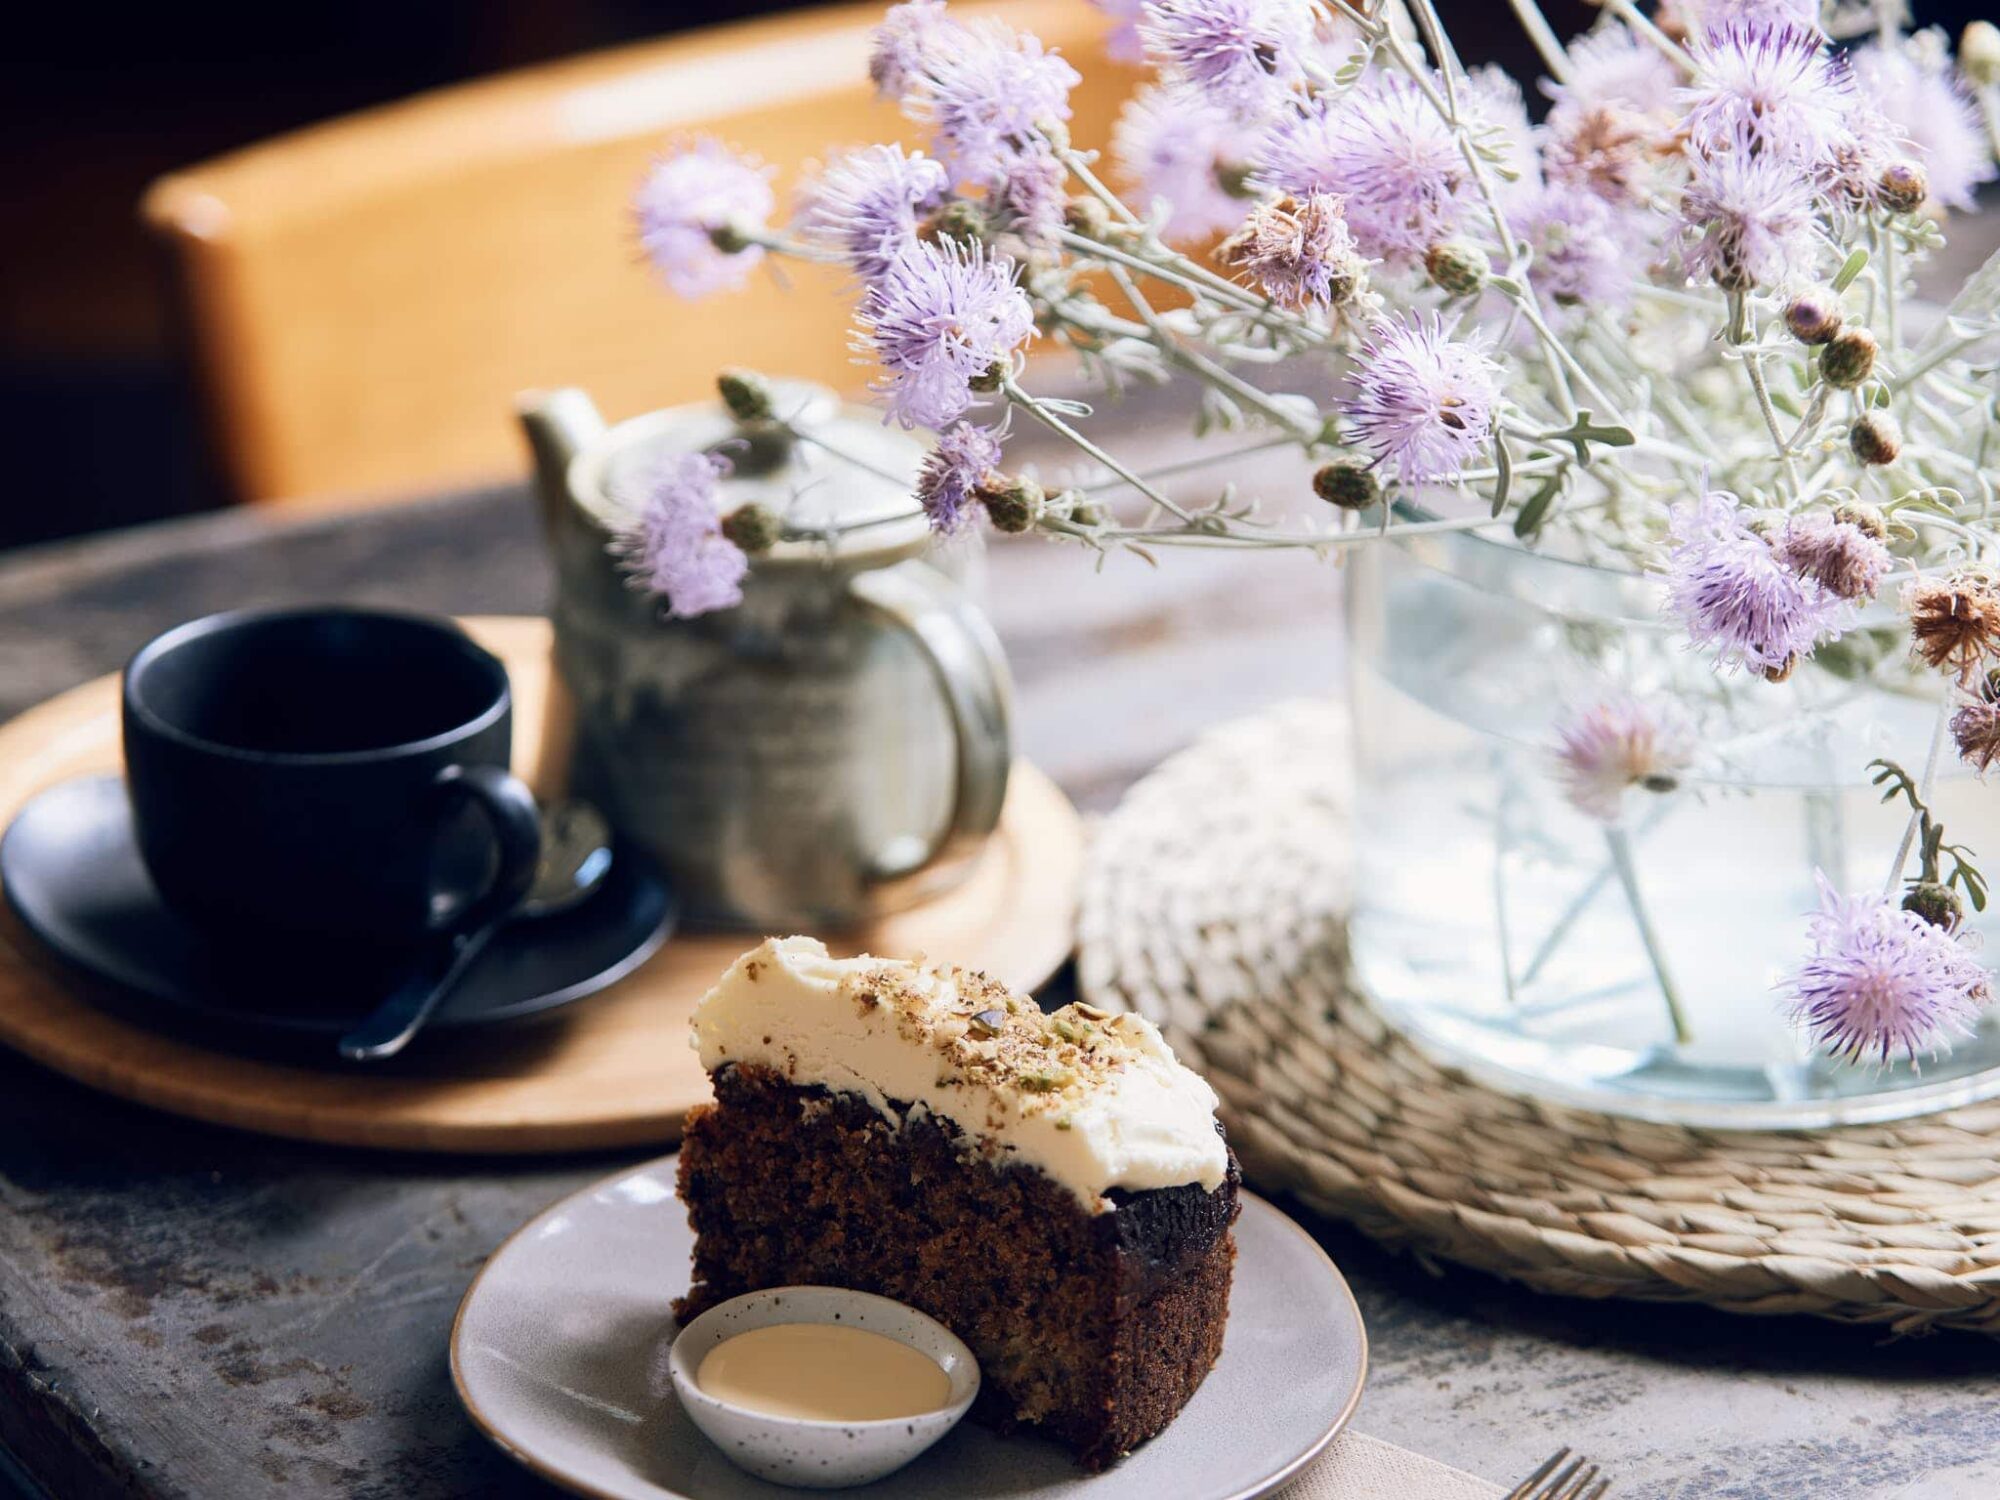 Tea, cake, flowers plated up on a table at Dindi Cafe